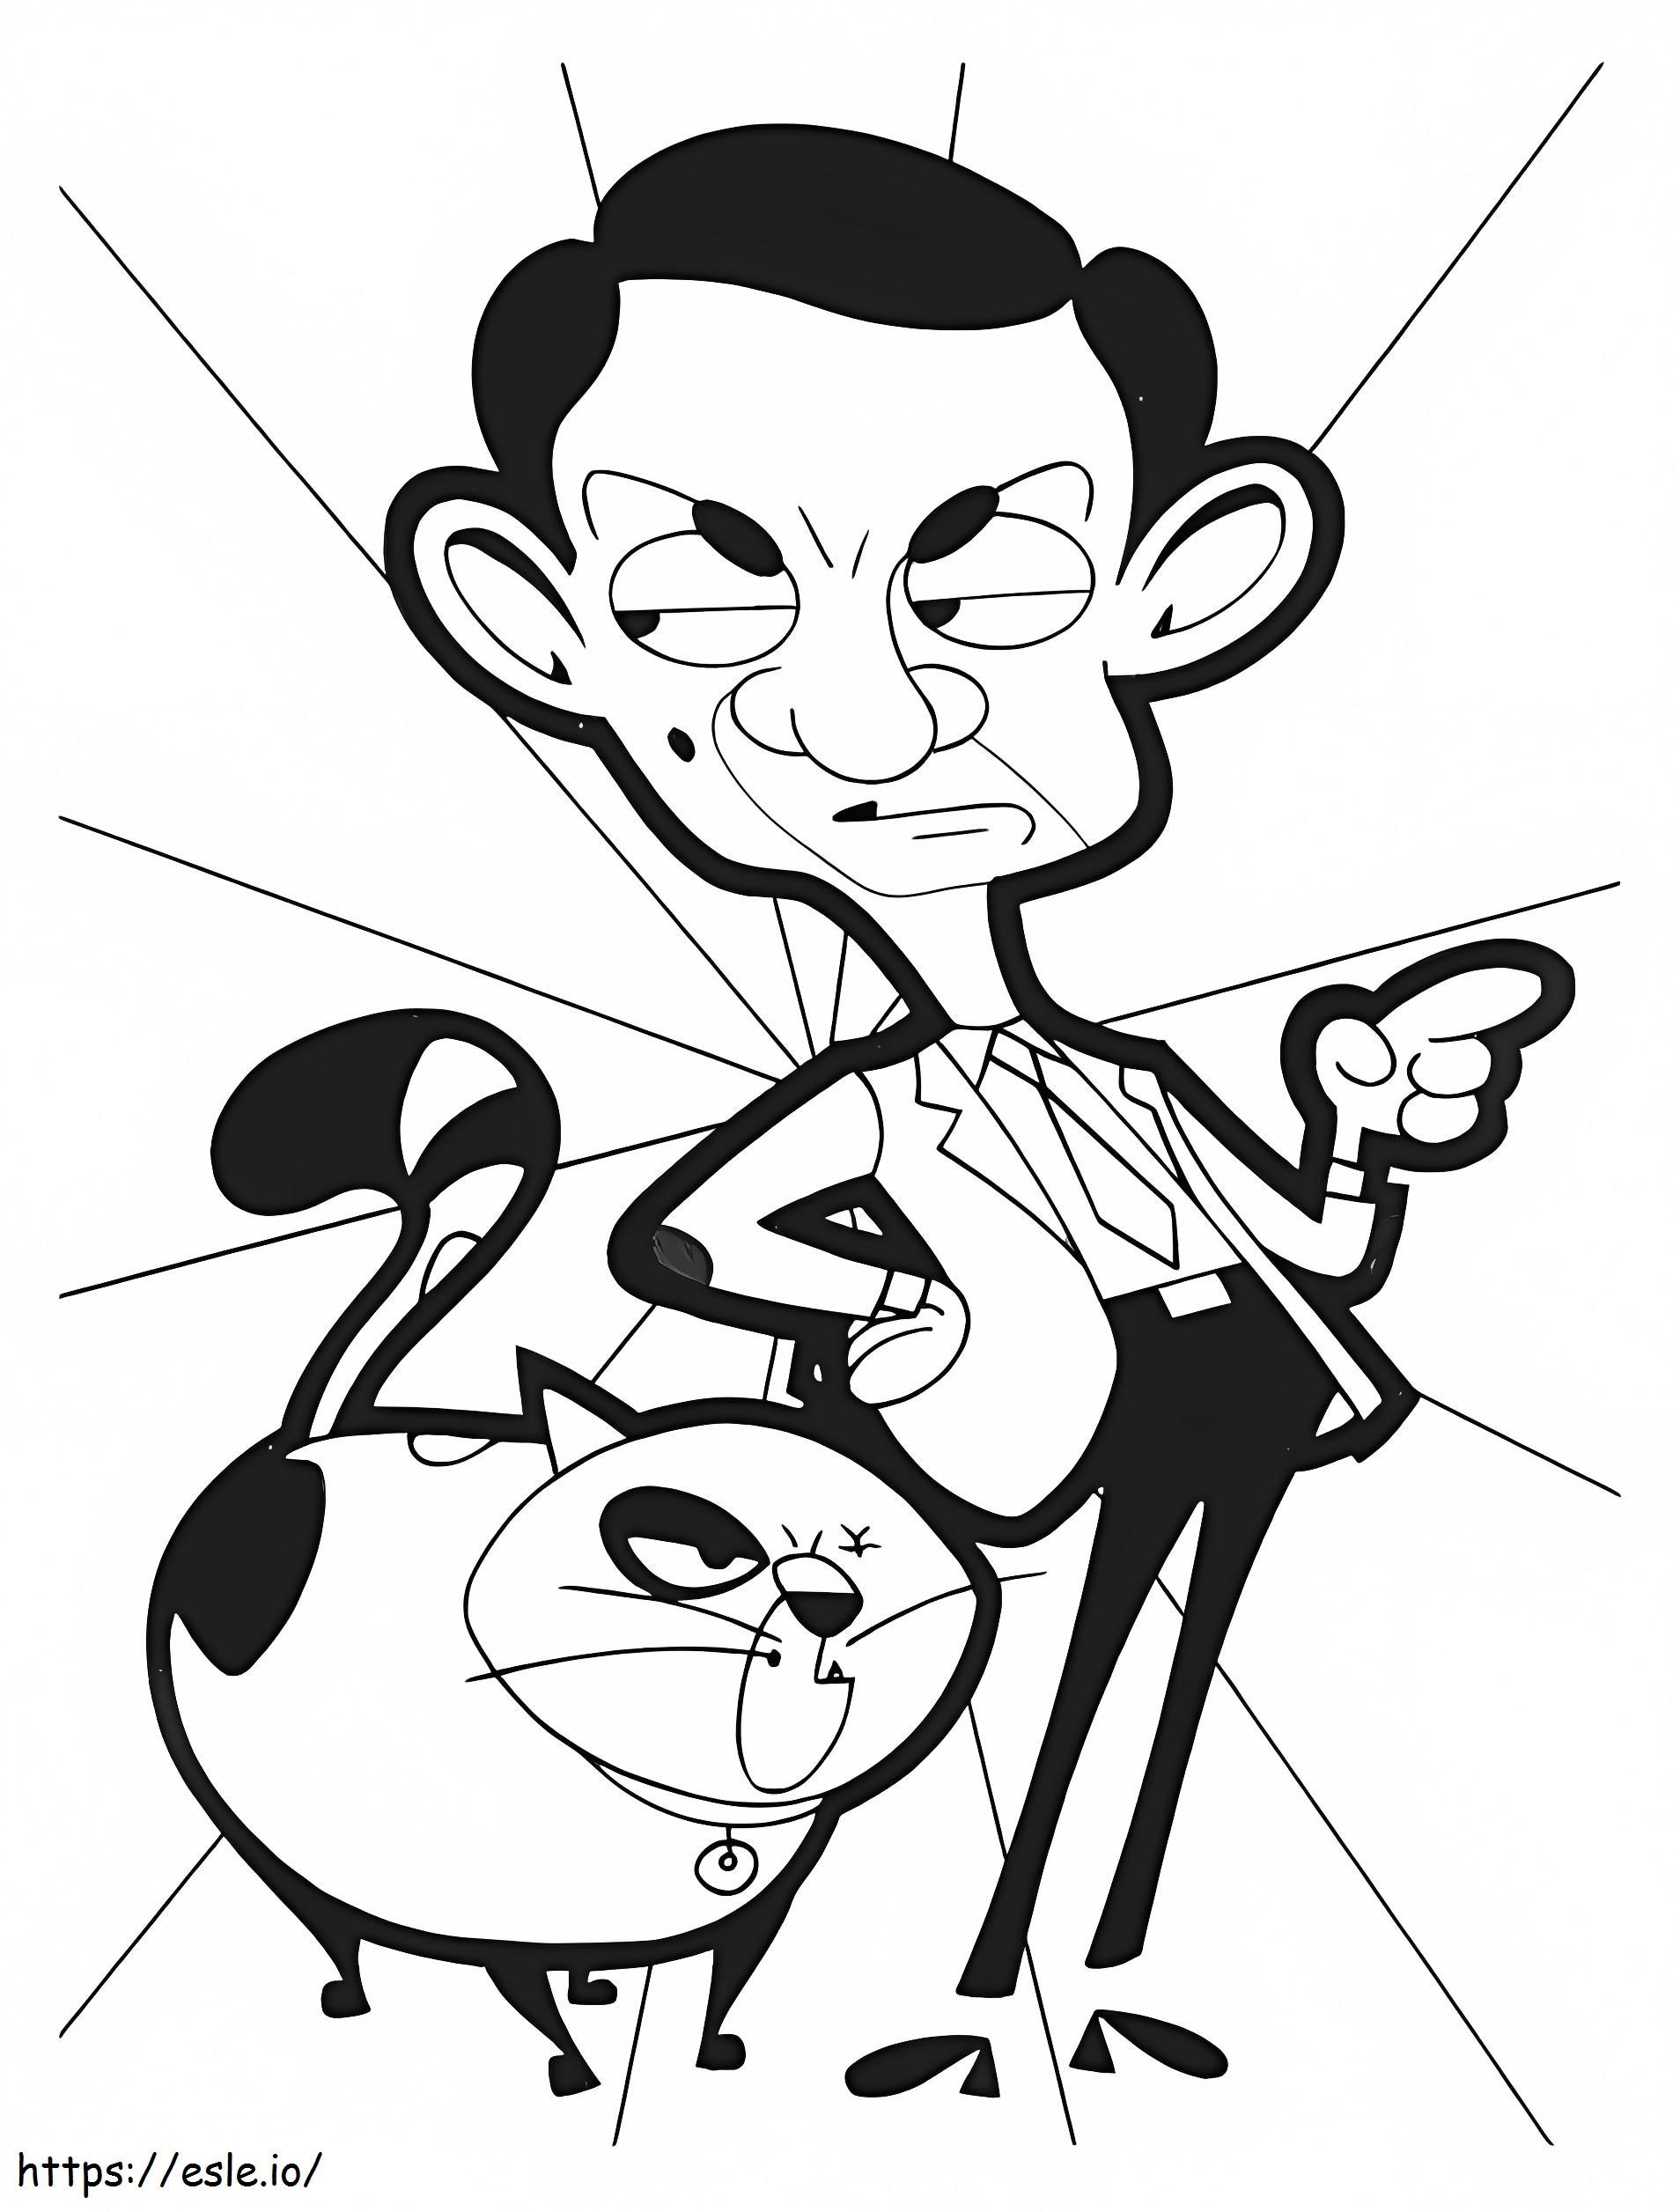 1531708864_Mr.Bean With Scraper A4 coloring page